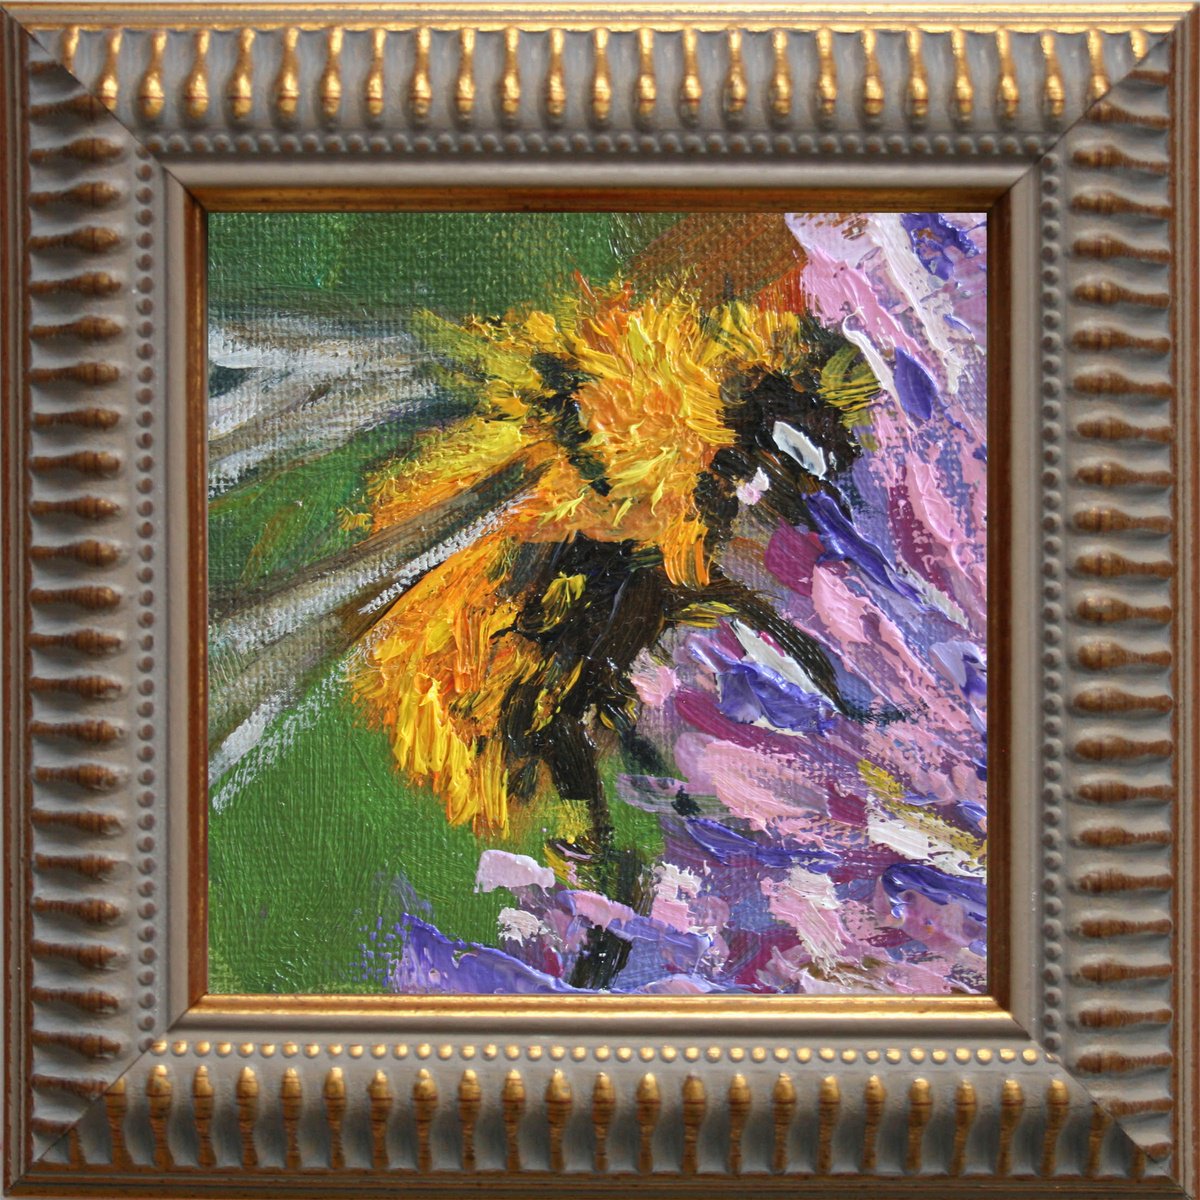 BUMBLEBEE 10 framed / FROM MY SERIES MINI PICTURE / ORIGINAL PAINTING by Salana Art Gallery